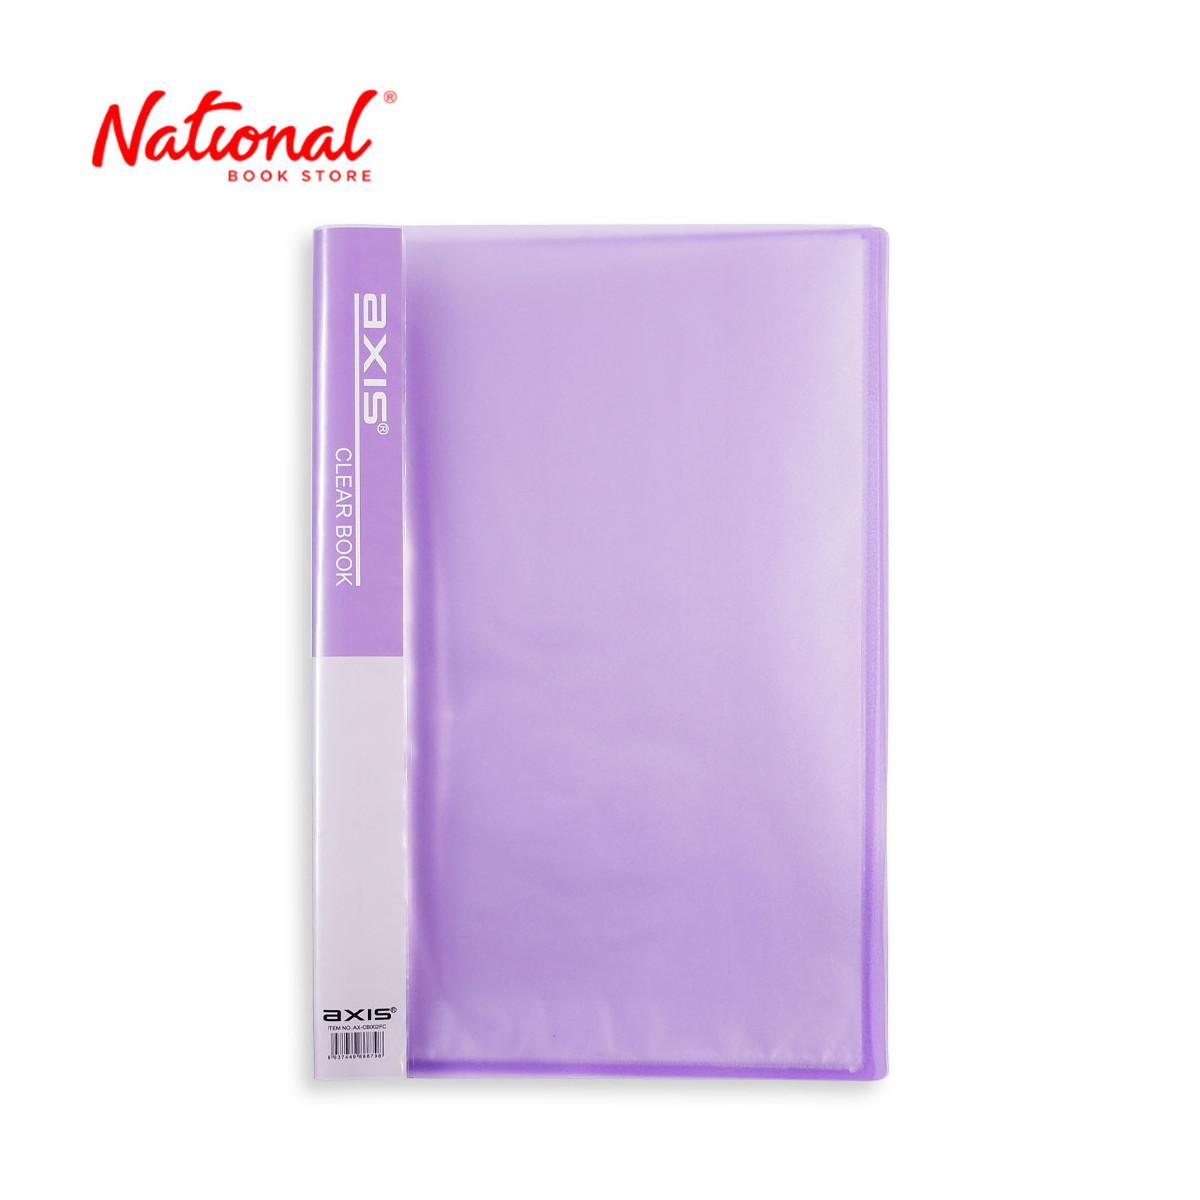 Axis Clearbook Fixed AX-CB002FC Long Plain with Insert Spine Label, Violet - School & Office Supplies